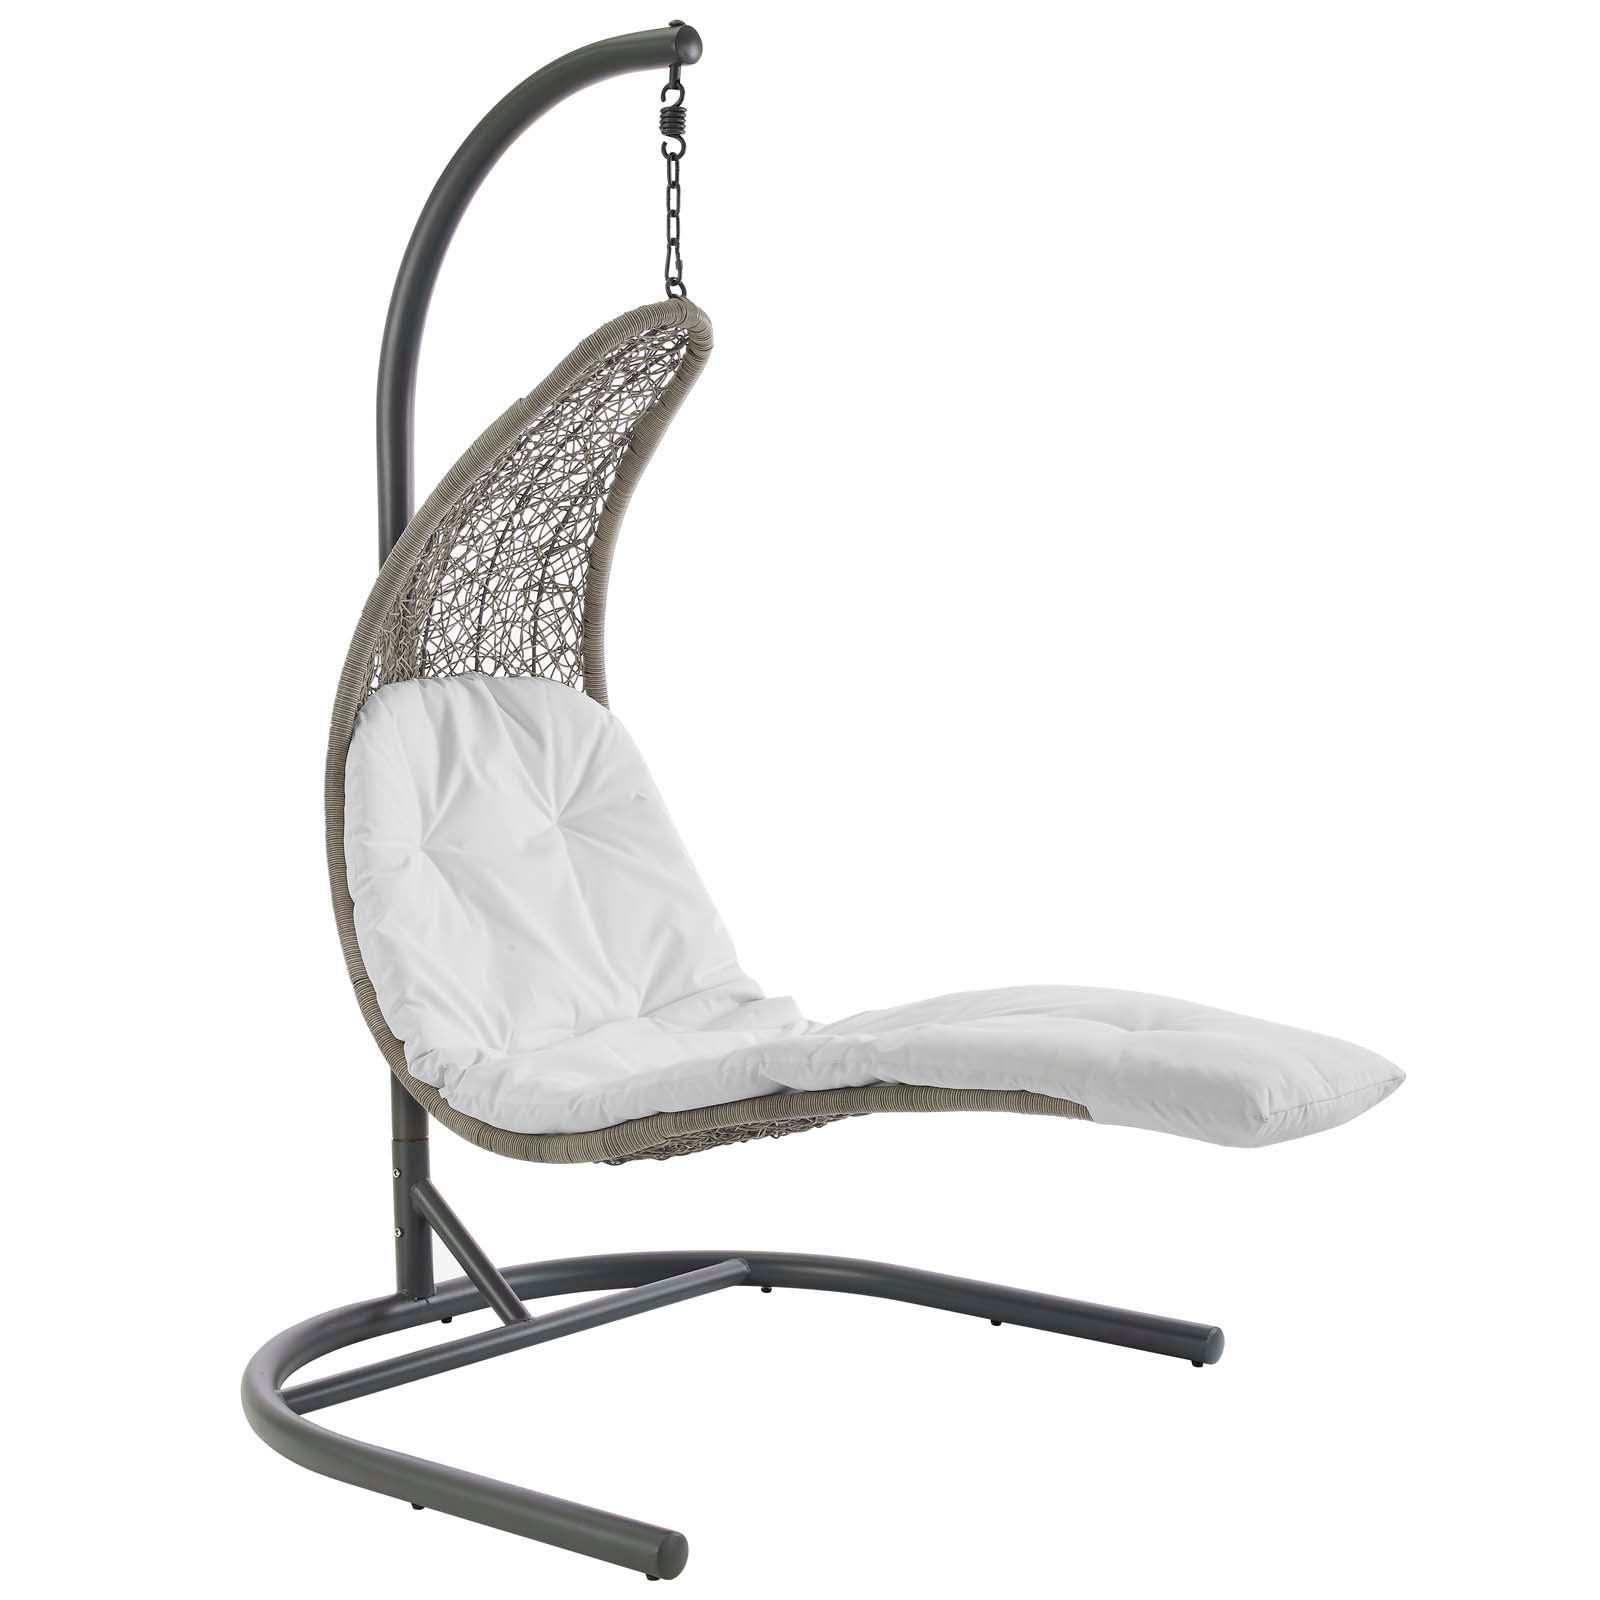 Landscape Hanging Chaise Lounge Outdoor Patio Swing Chair - Elite Maison